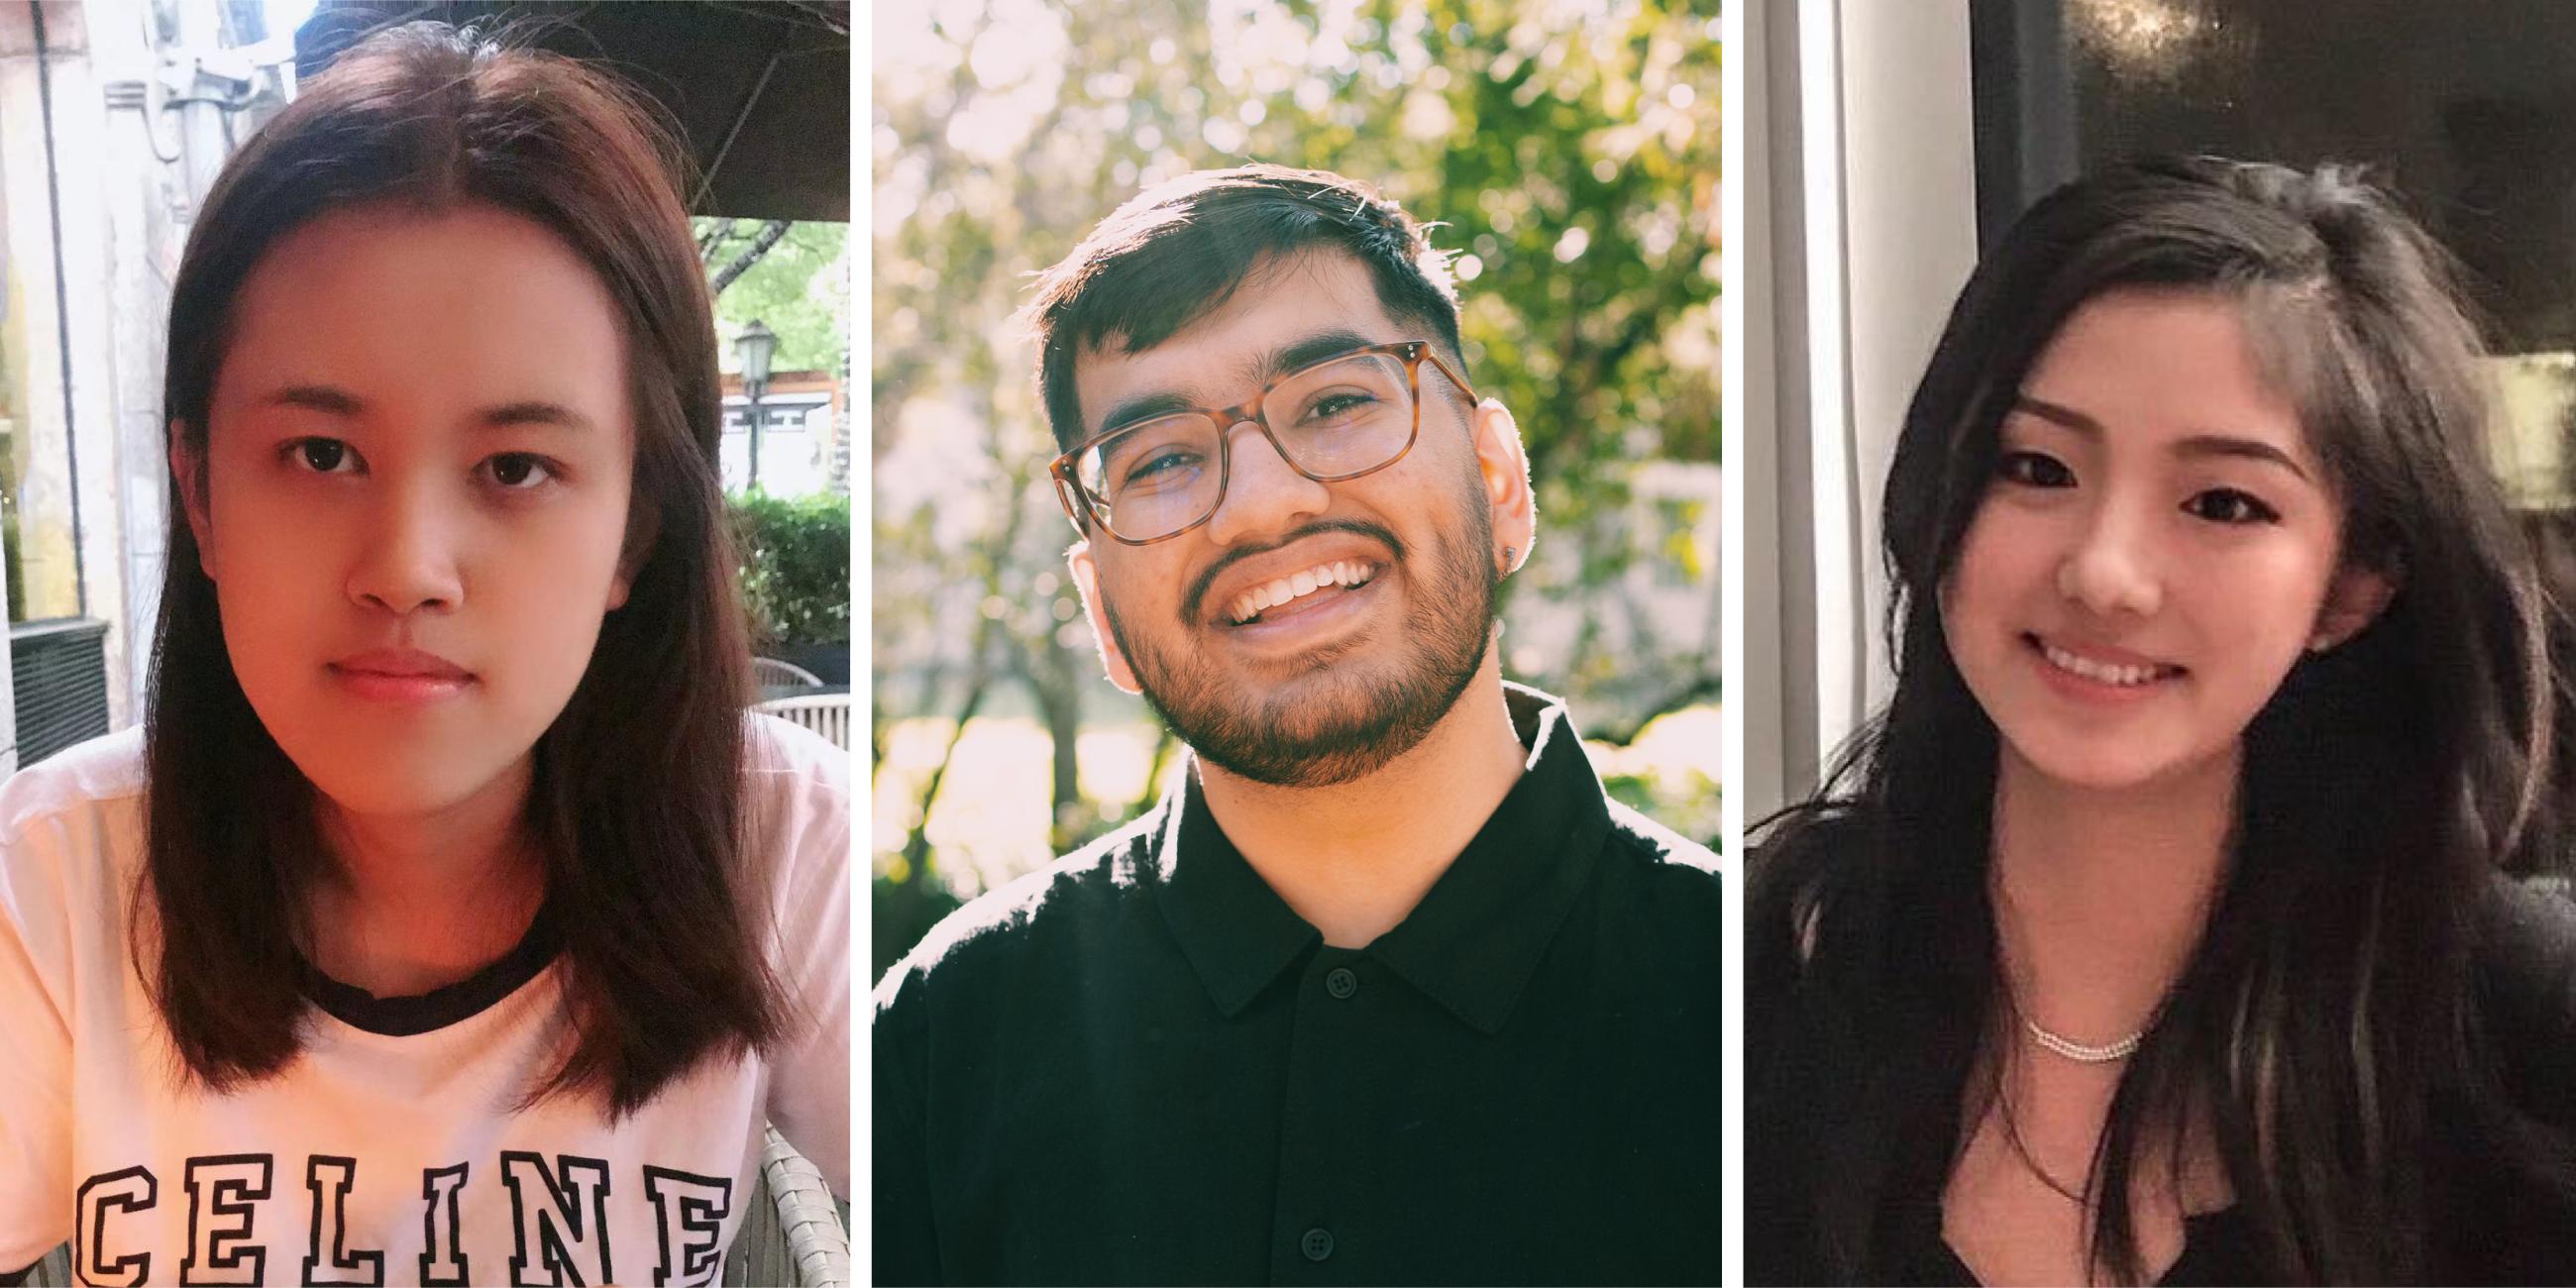 UC Berkeley graduates Elizabeth Hong, Vihaan Manchanda and Maggie Wang completed internships with the American Heart Association this past spring as part of the Data Science Discovery program. (Photo/ Elizabeth Hong, Joanne Shin, Maggie Wang)